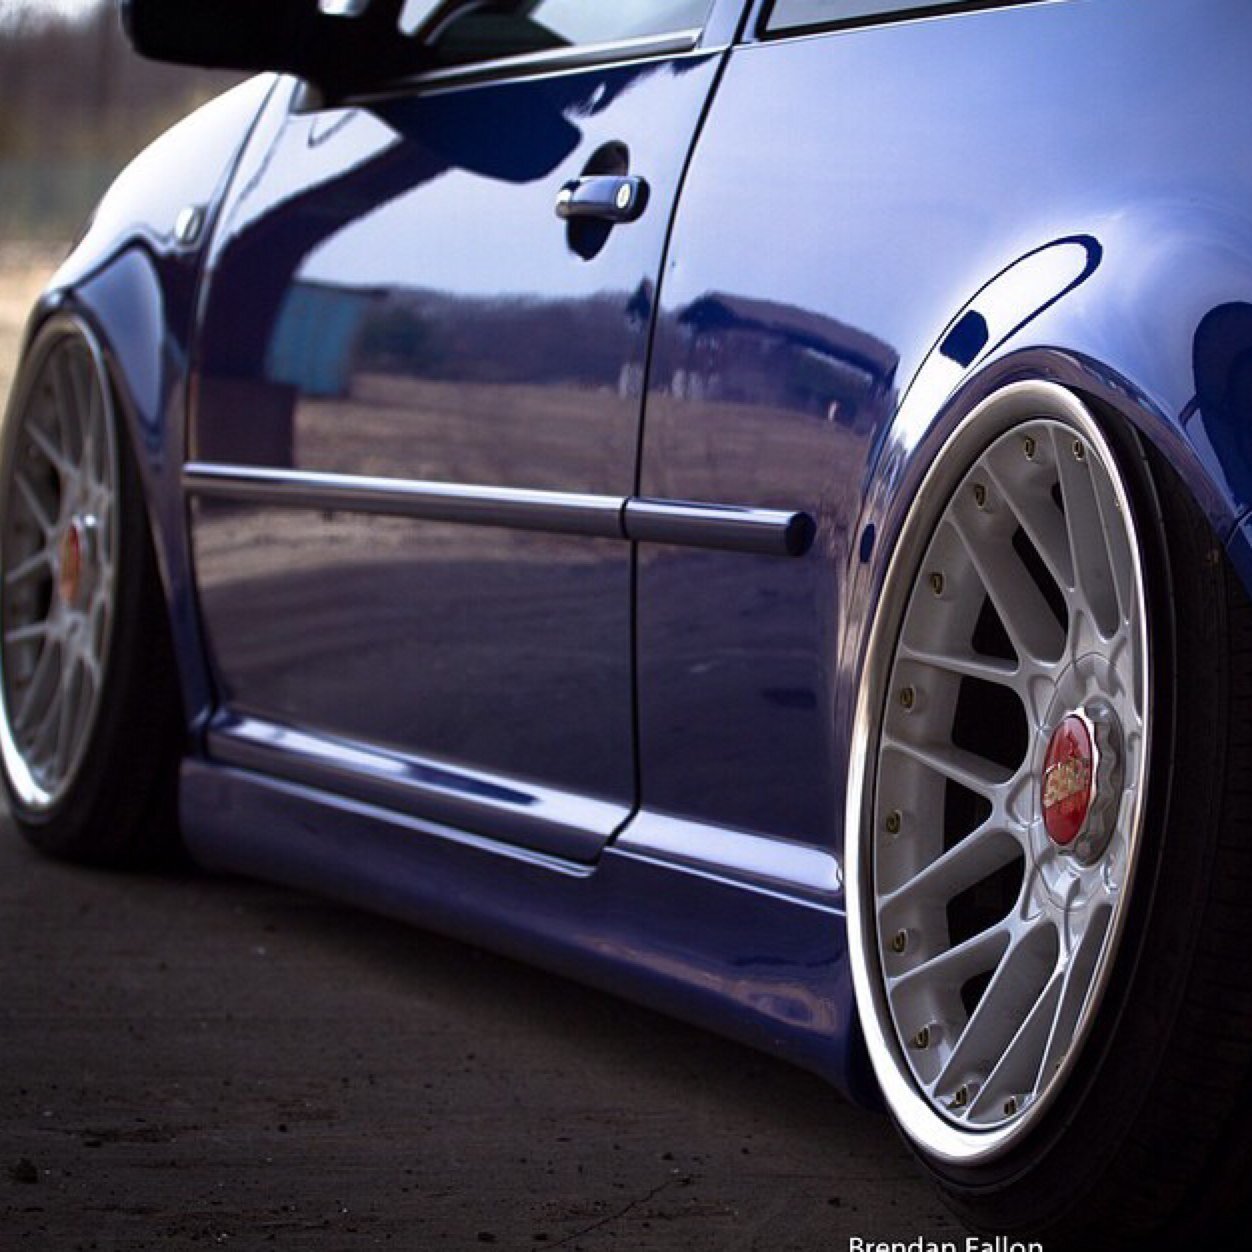 Stance • fitment • Society